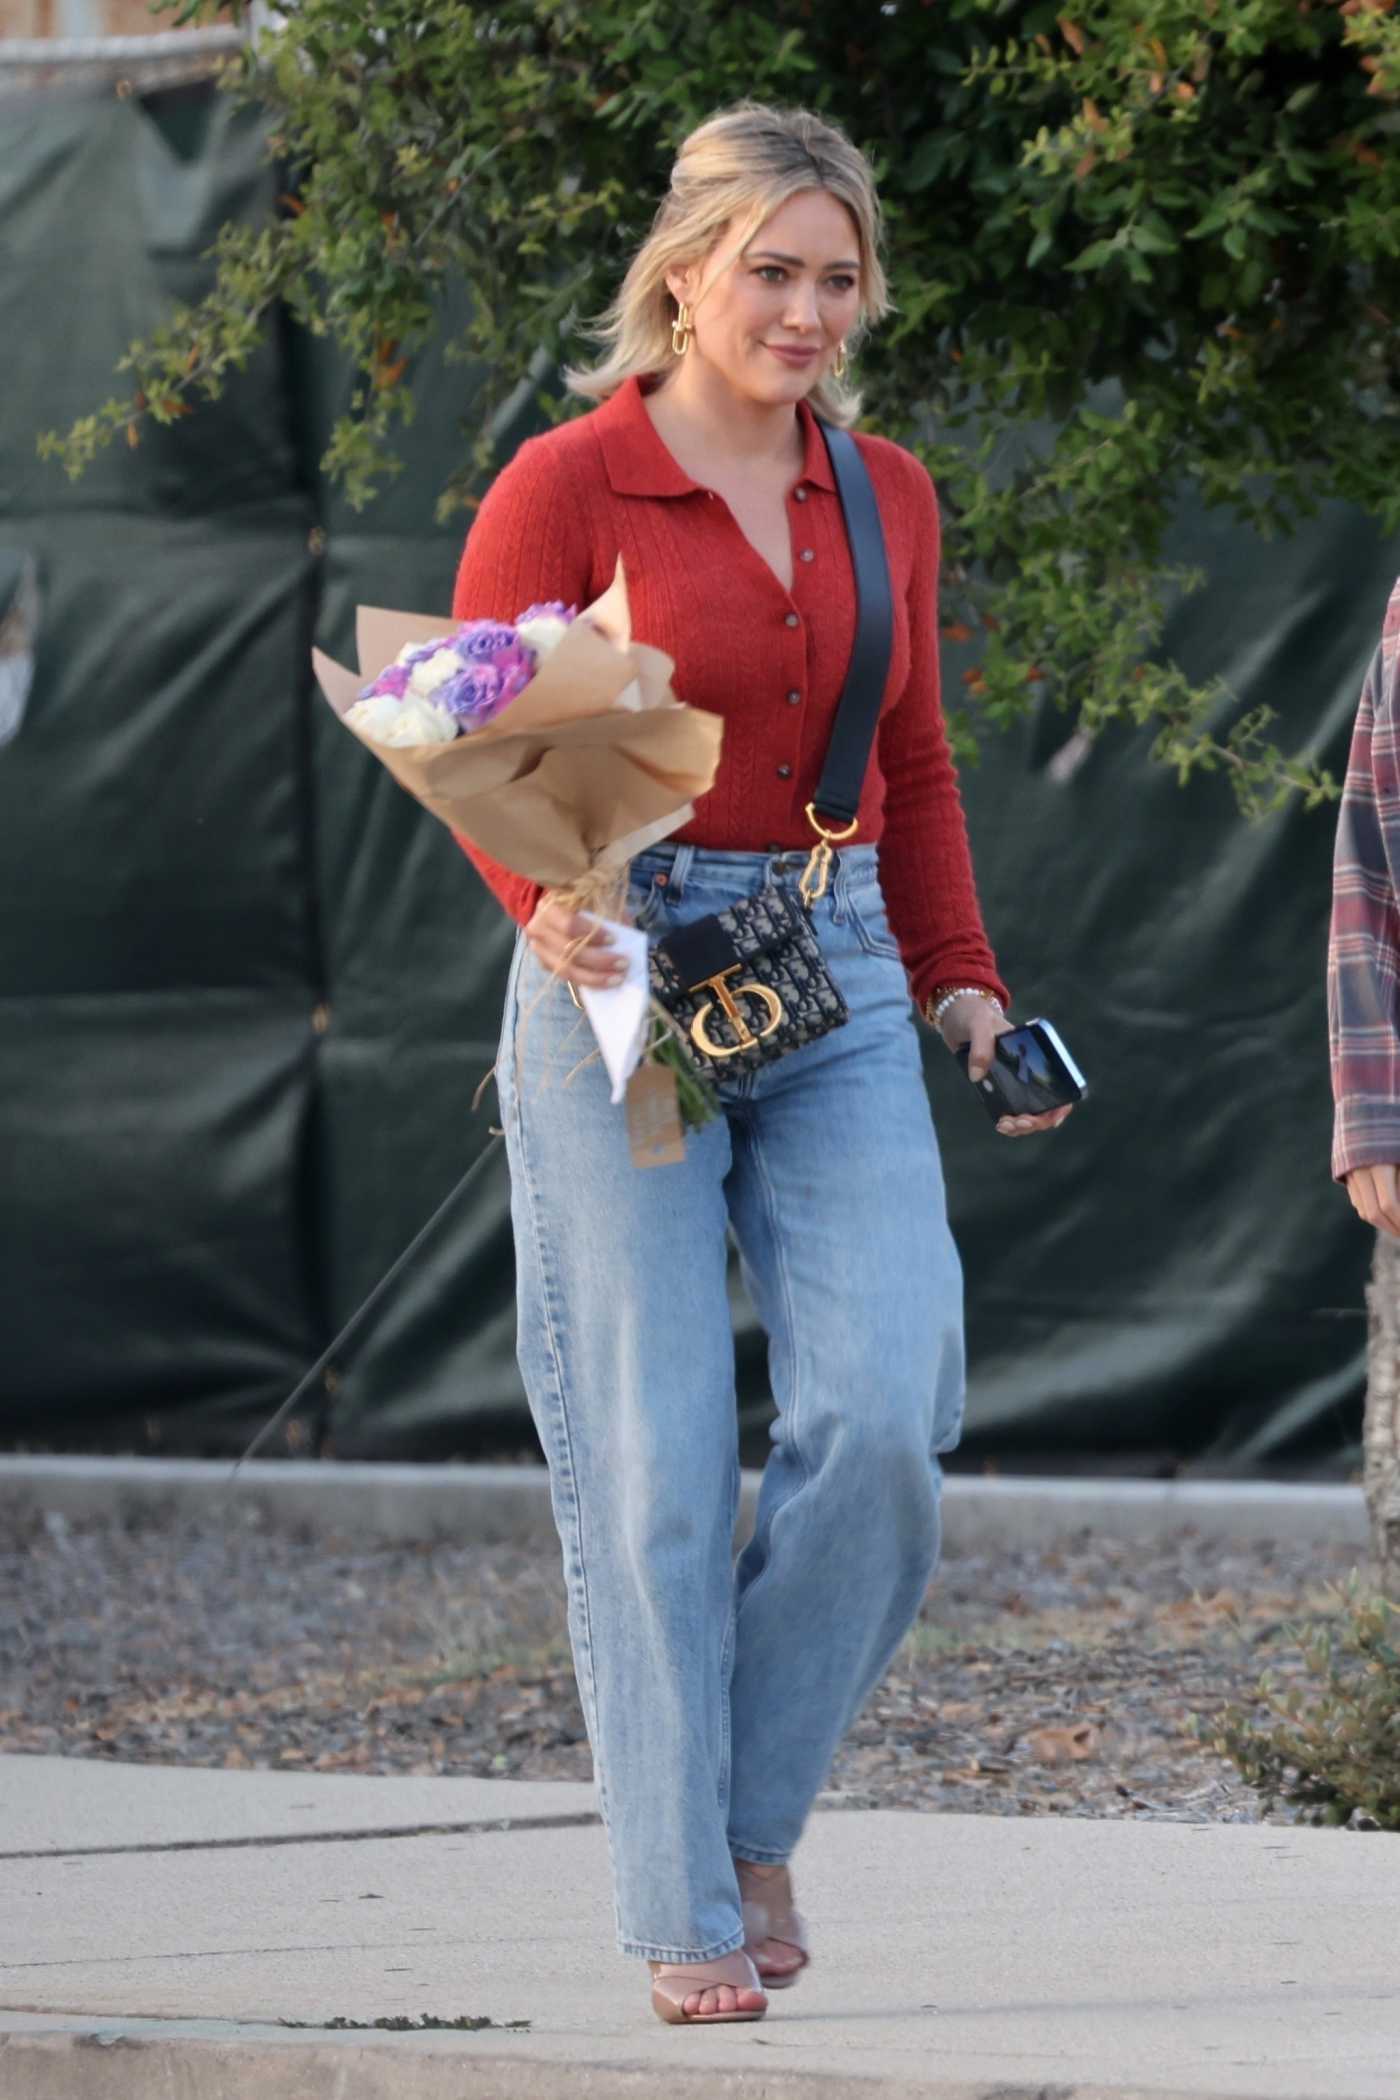 Hilary Duff in a Red Cardigan Goes to a Mother's Day Celebration Ceremony at Her Kids' School in Los Angeles 05/11/2023